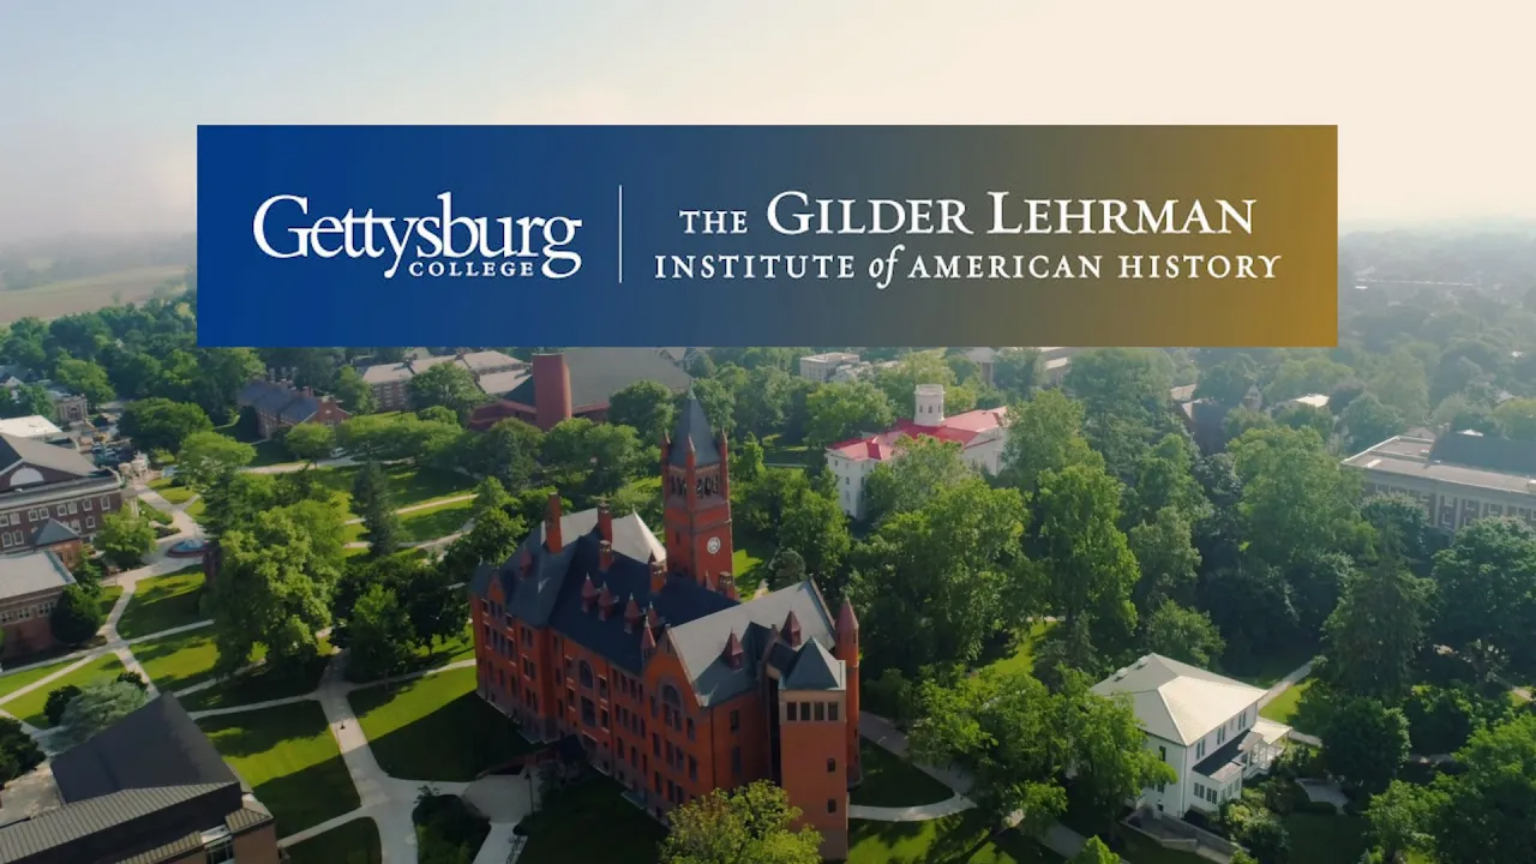 Aerial view of Gettysburg College campus with Gettysburg College and GLI wordmarks